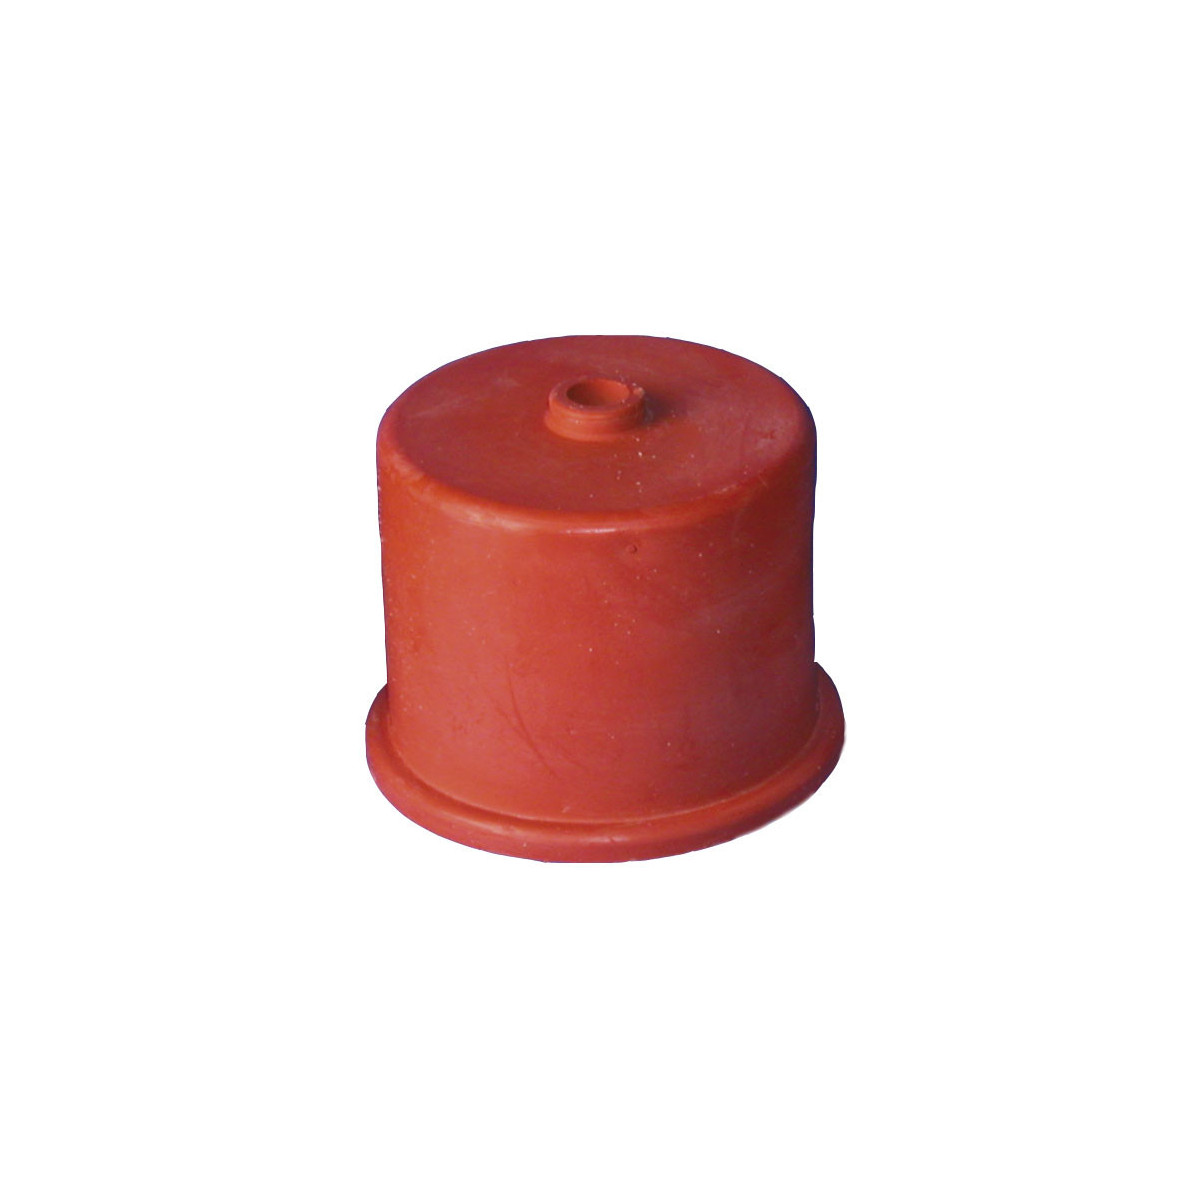 Rubber cap nr 4A, 50mm with 9mm hole